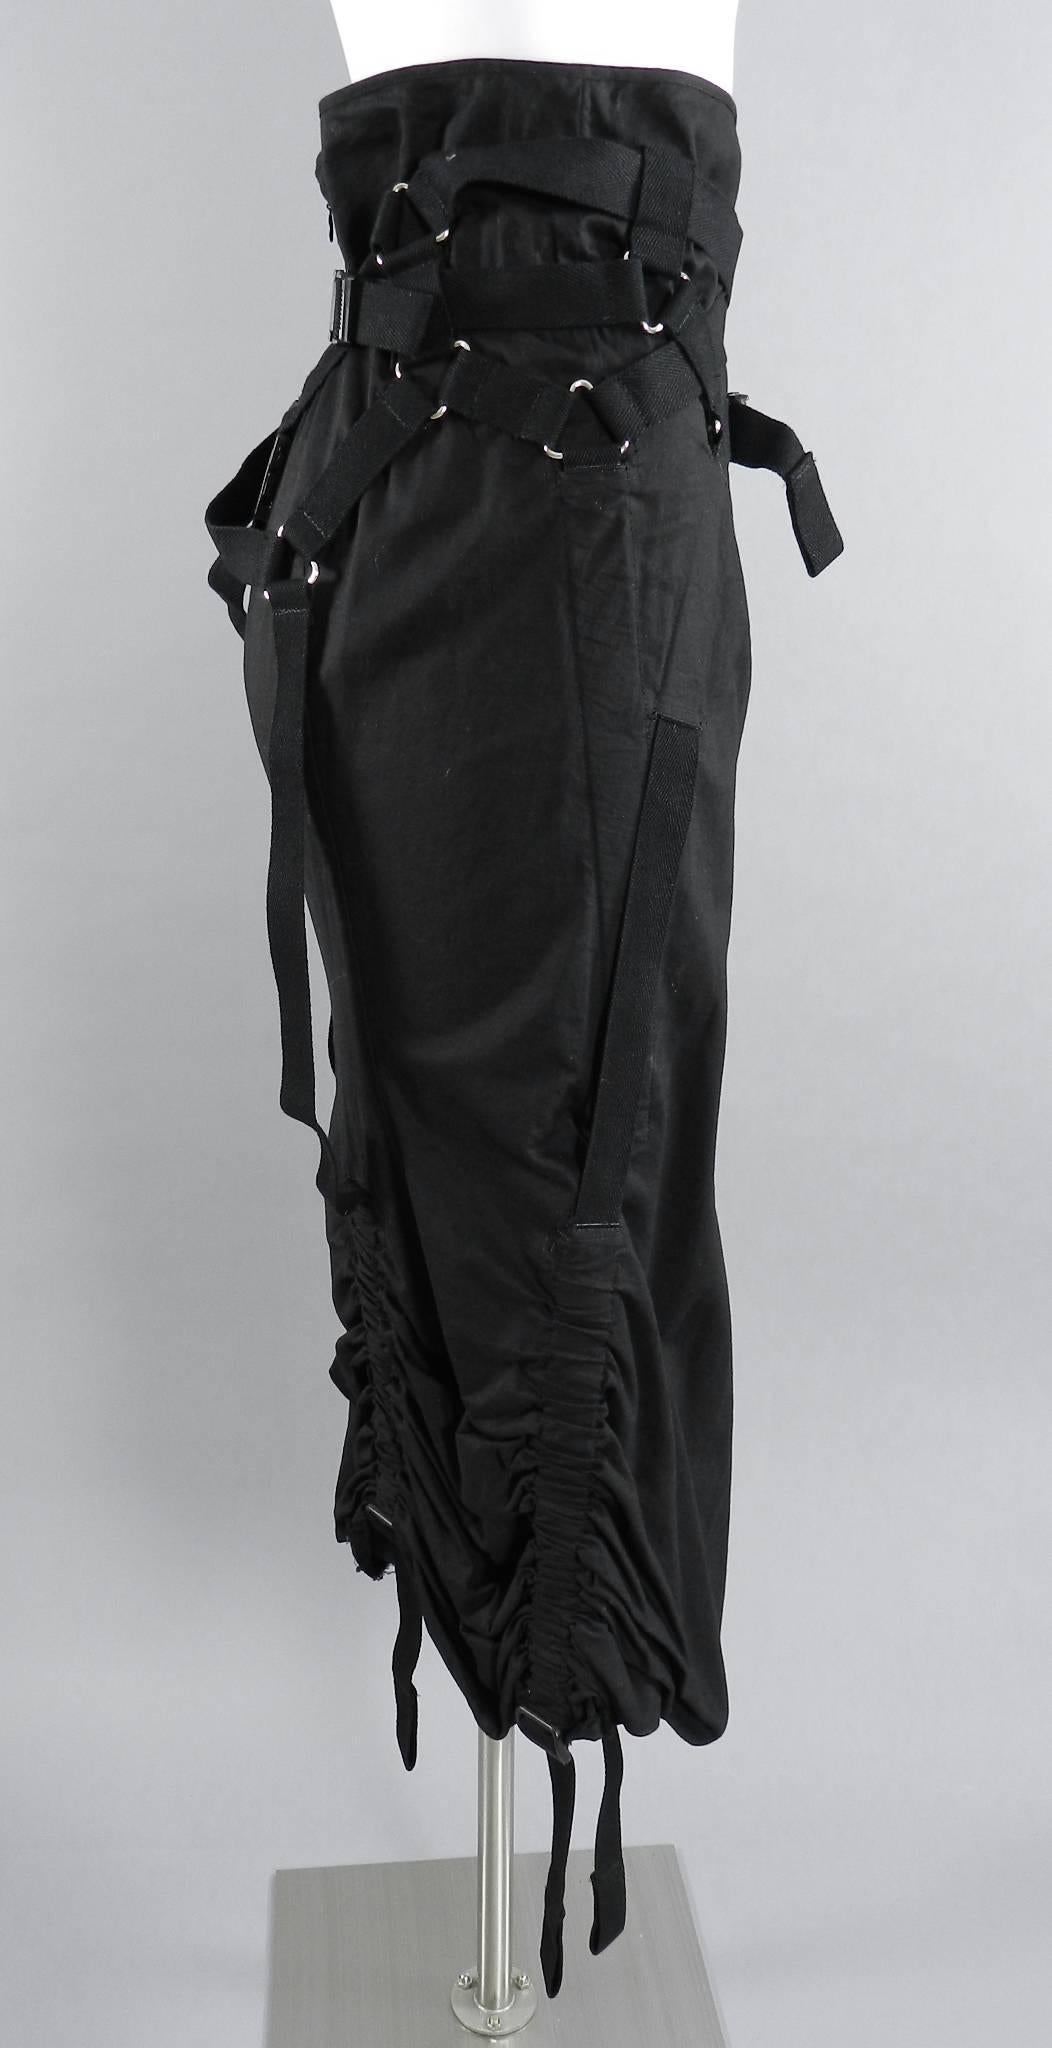 Junya Watanabe Comme des Garcons 2002 black parachute skirt. Long black cotton skirt with centre back zipper, straps and buckle design, ruched hem. Excellent condition. 100% cotton. Tagged size M but best for about USA size 4/6. Garment waist is 31